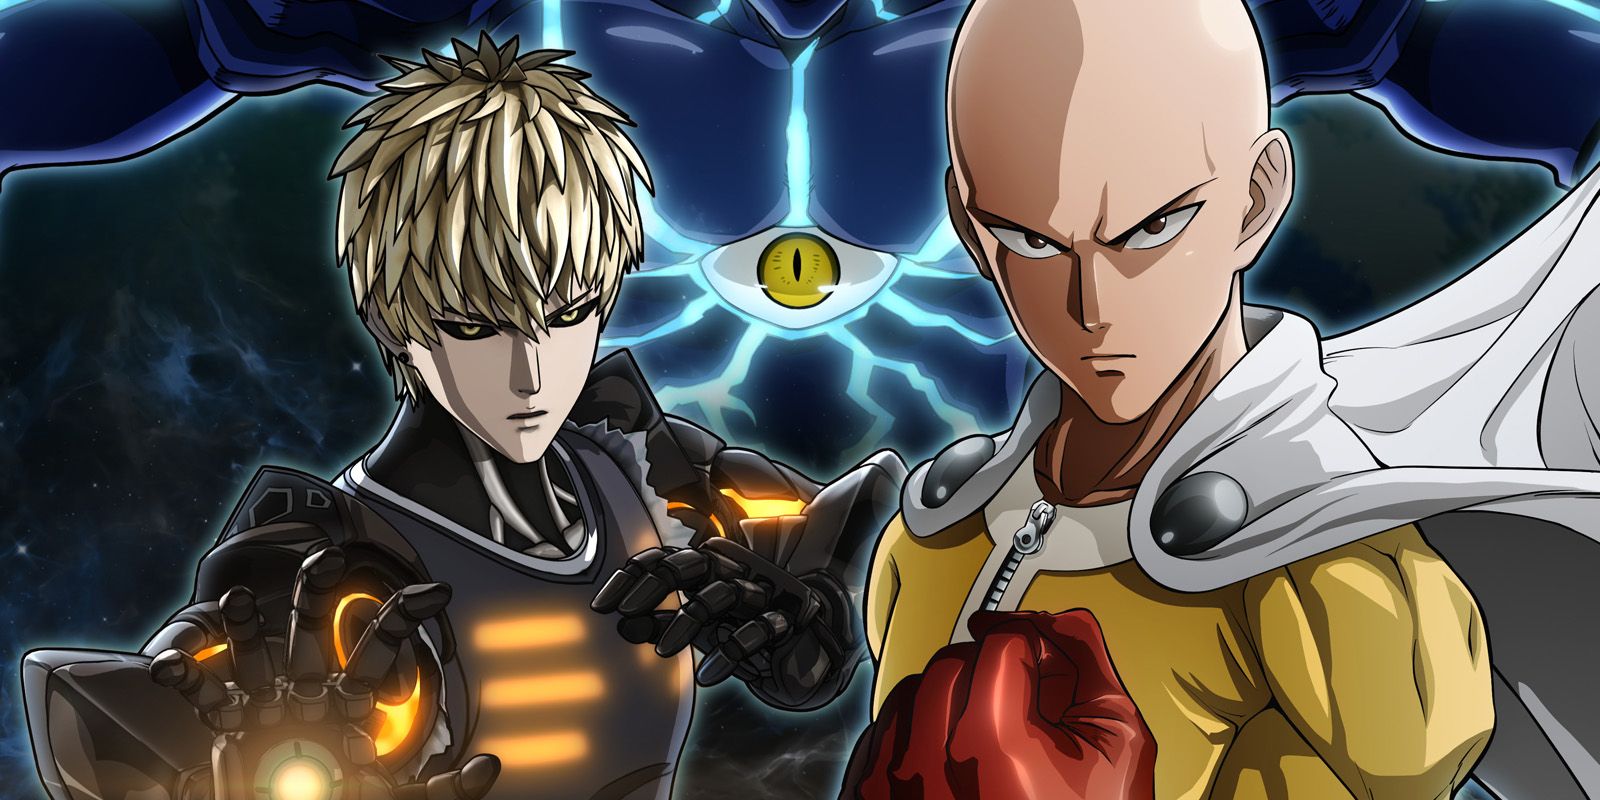 One-Punch Man: A Hero Nobody Knows Review - IGN